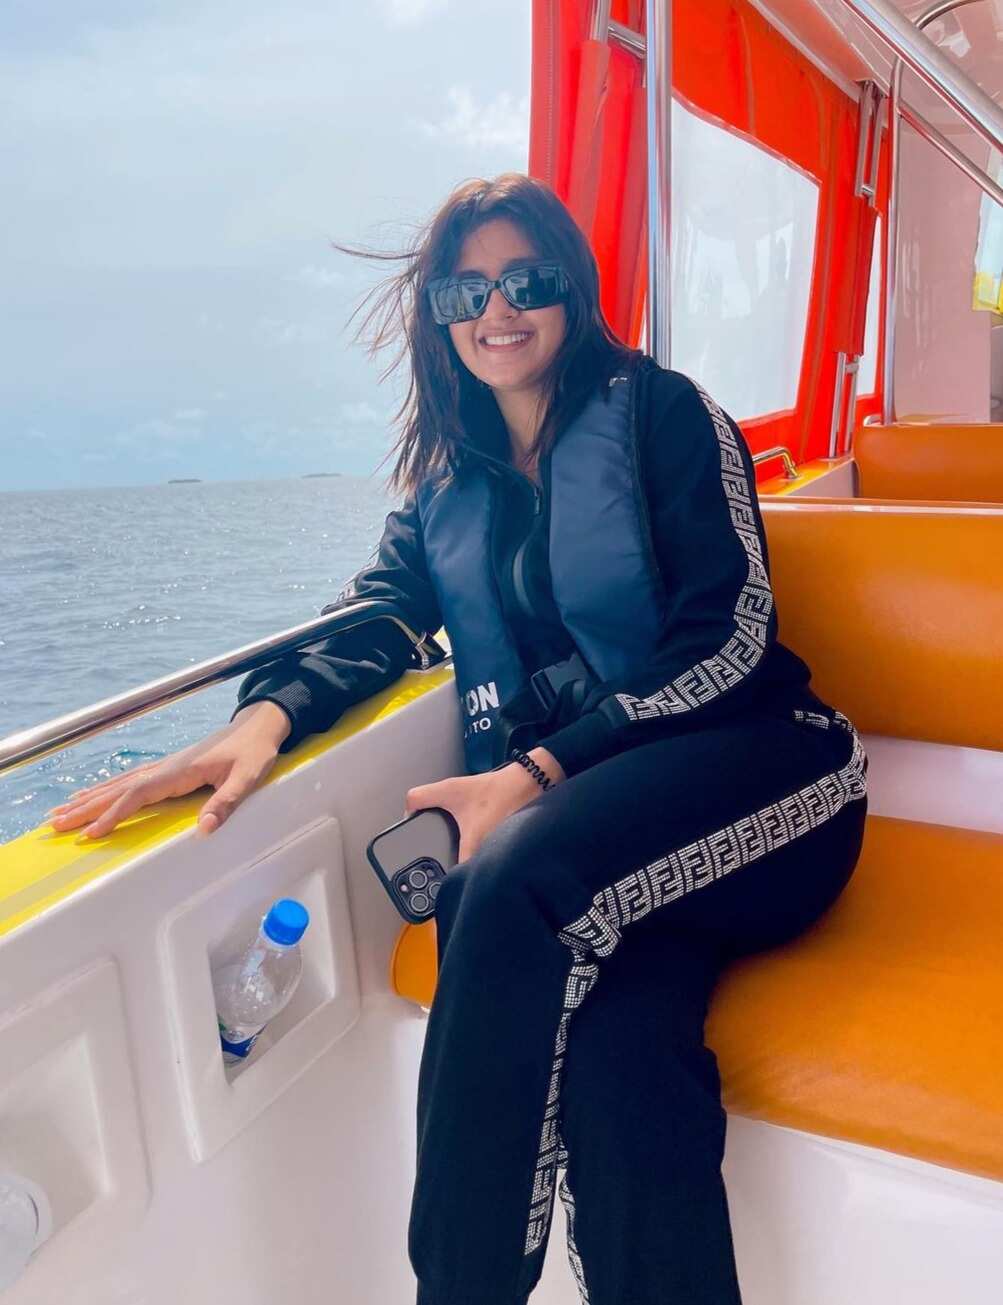 Anjali Arora appears to be obsessed with boat rides